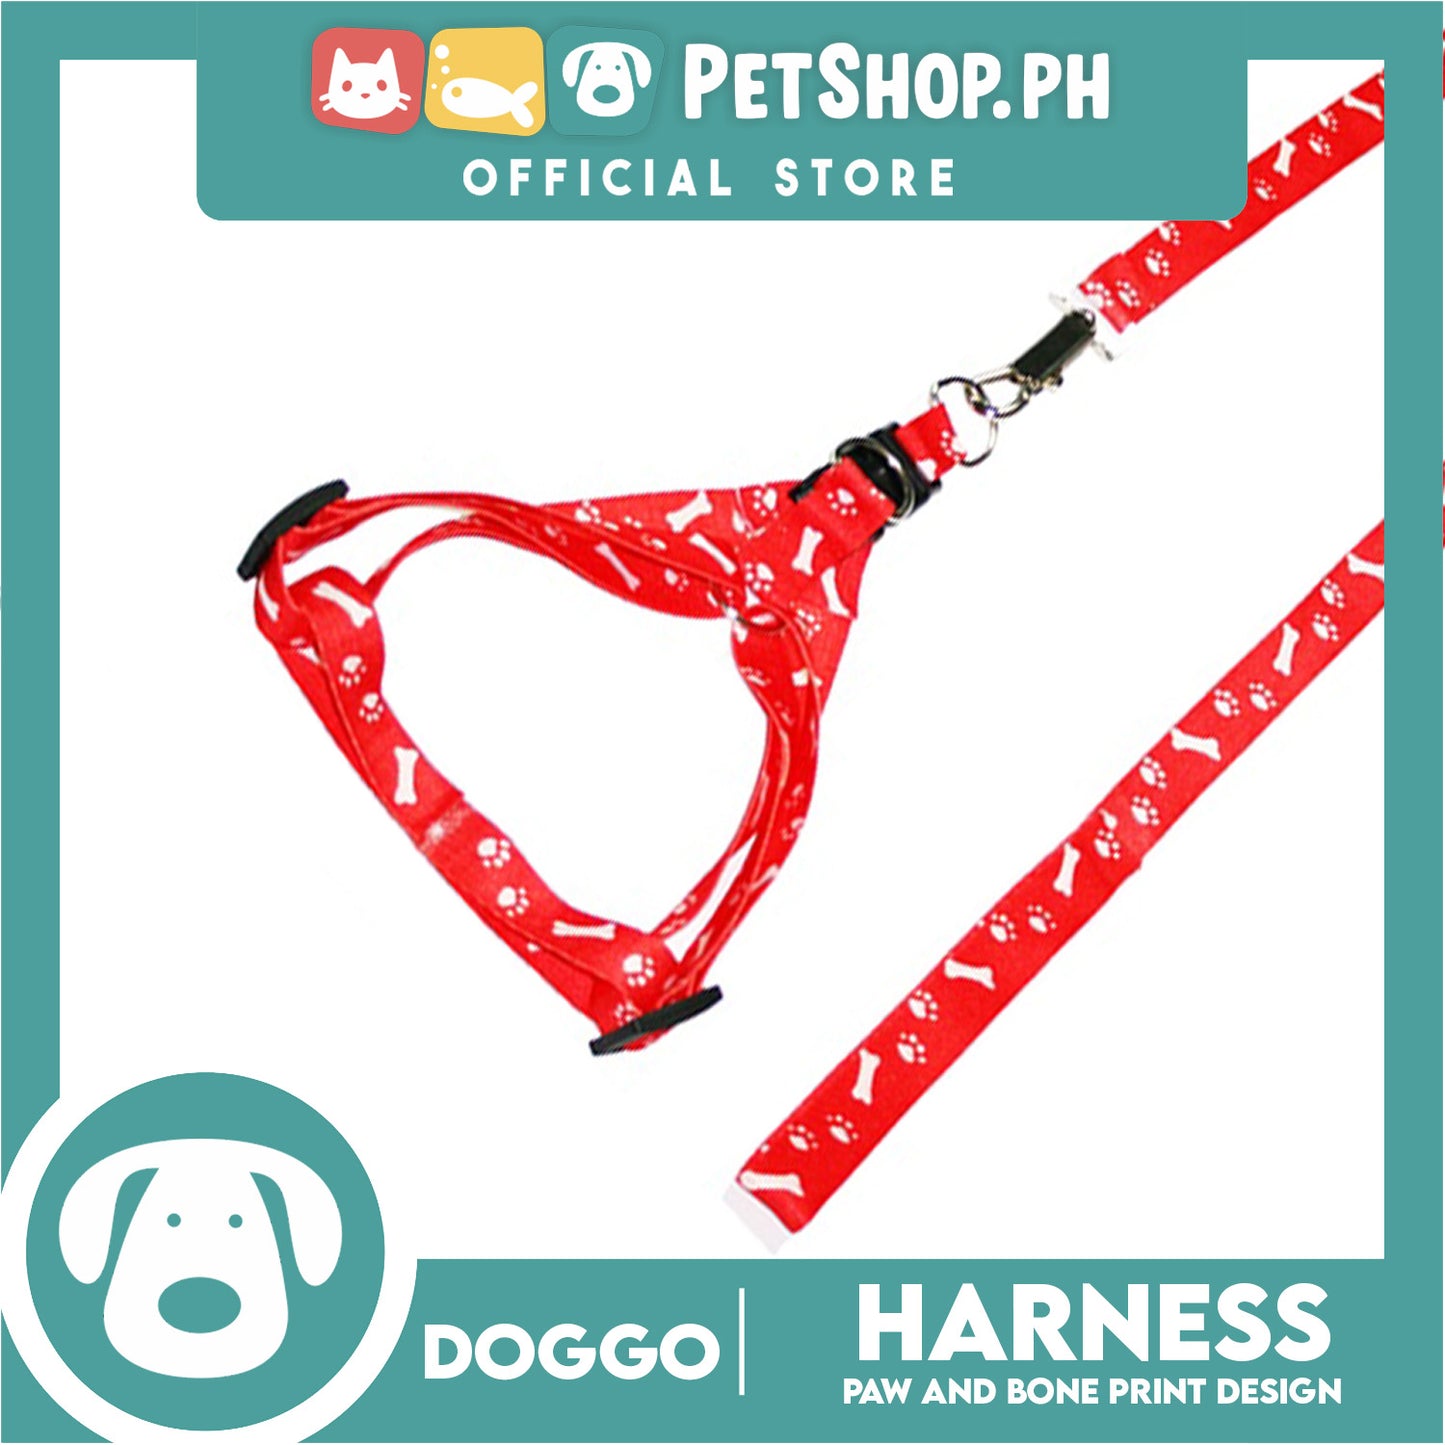 Doggo Harness Leash With Design Small Size (Red) Harness Leash for Your Puppy